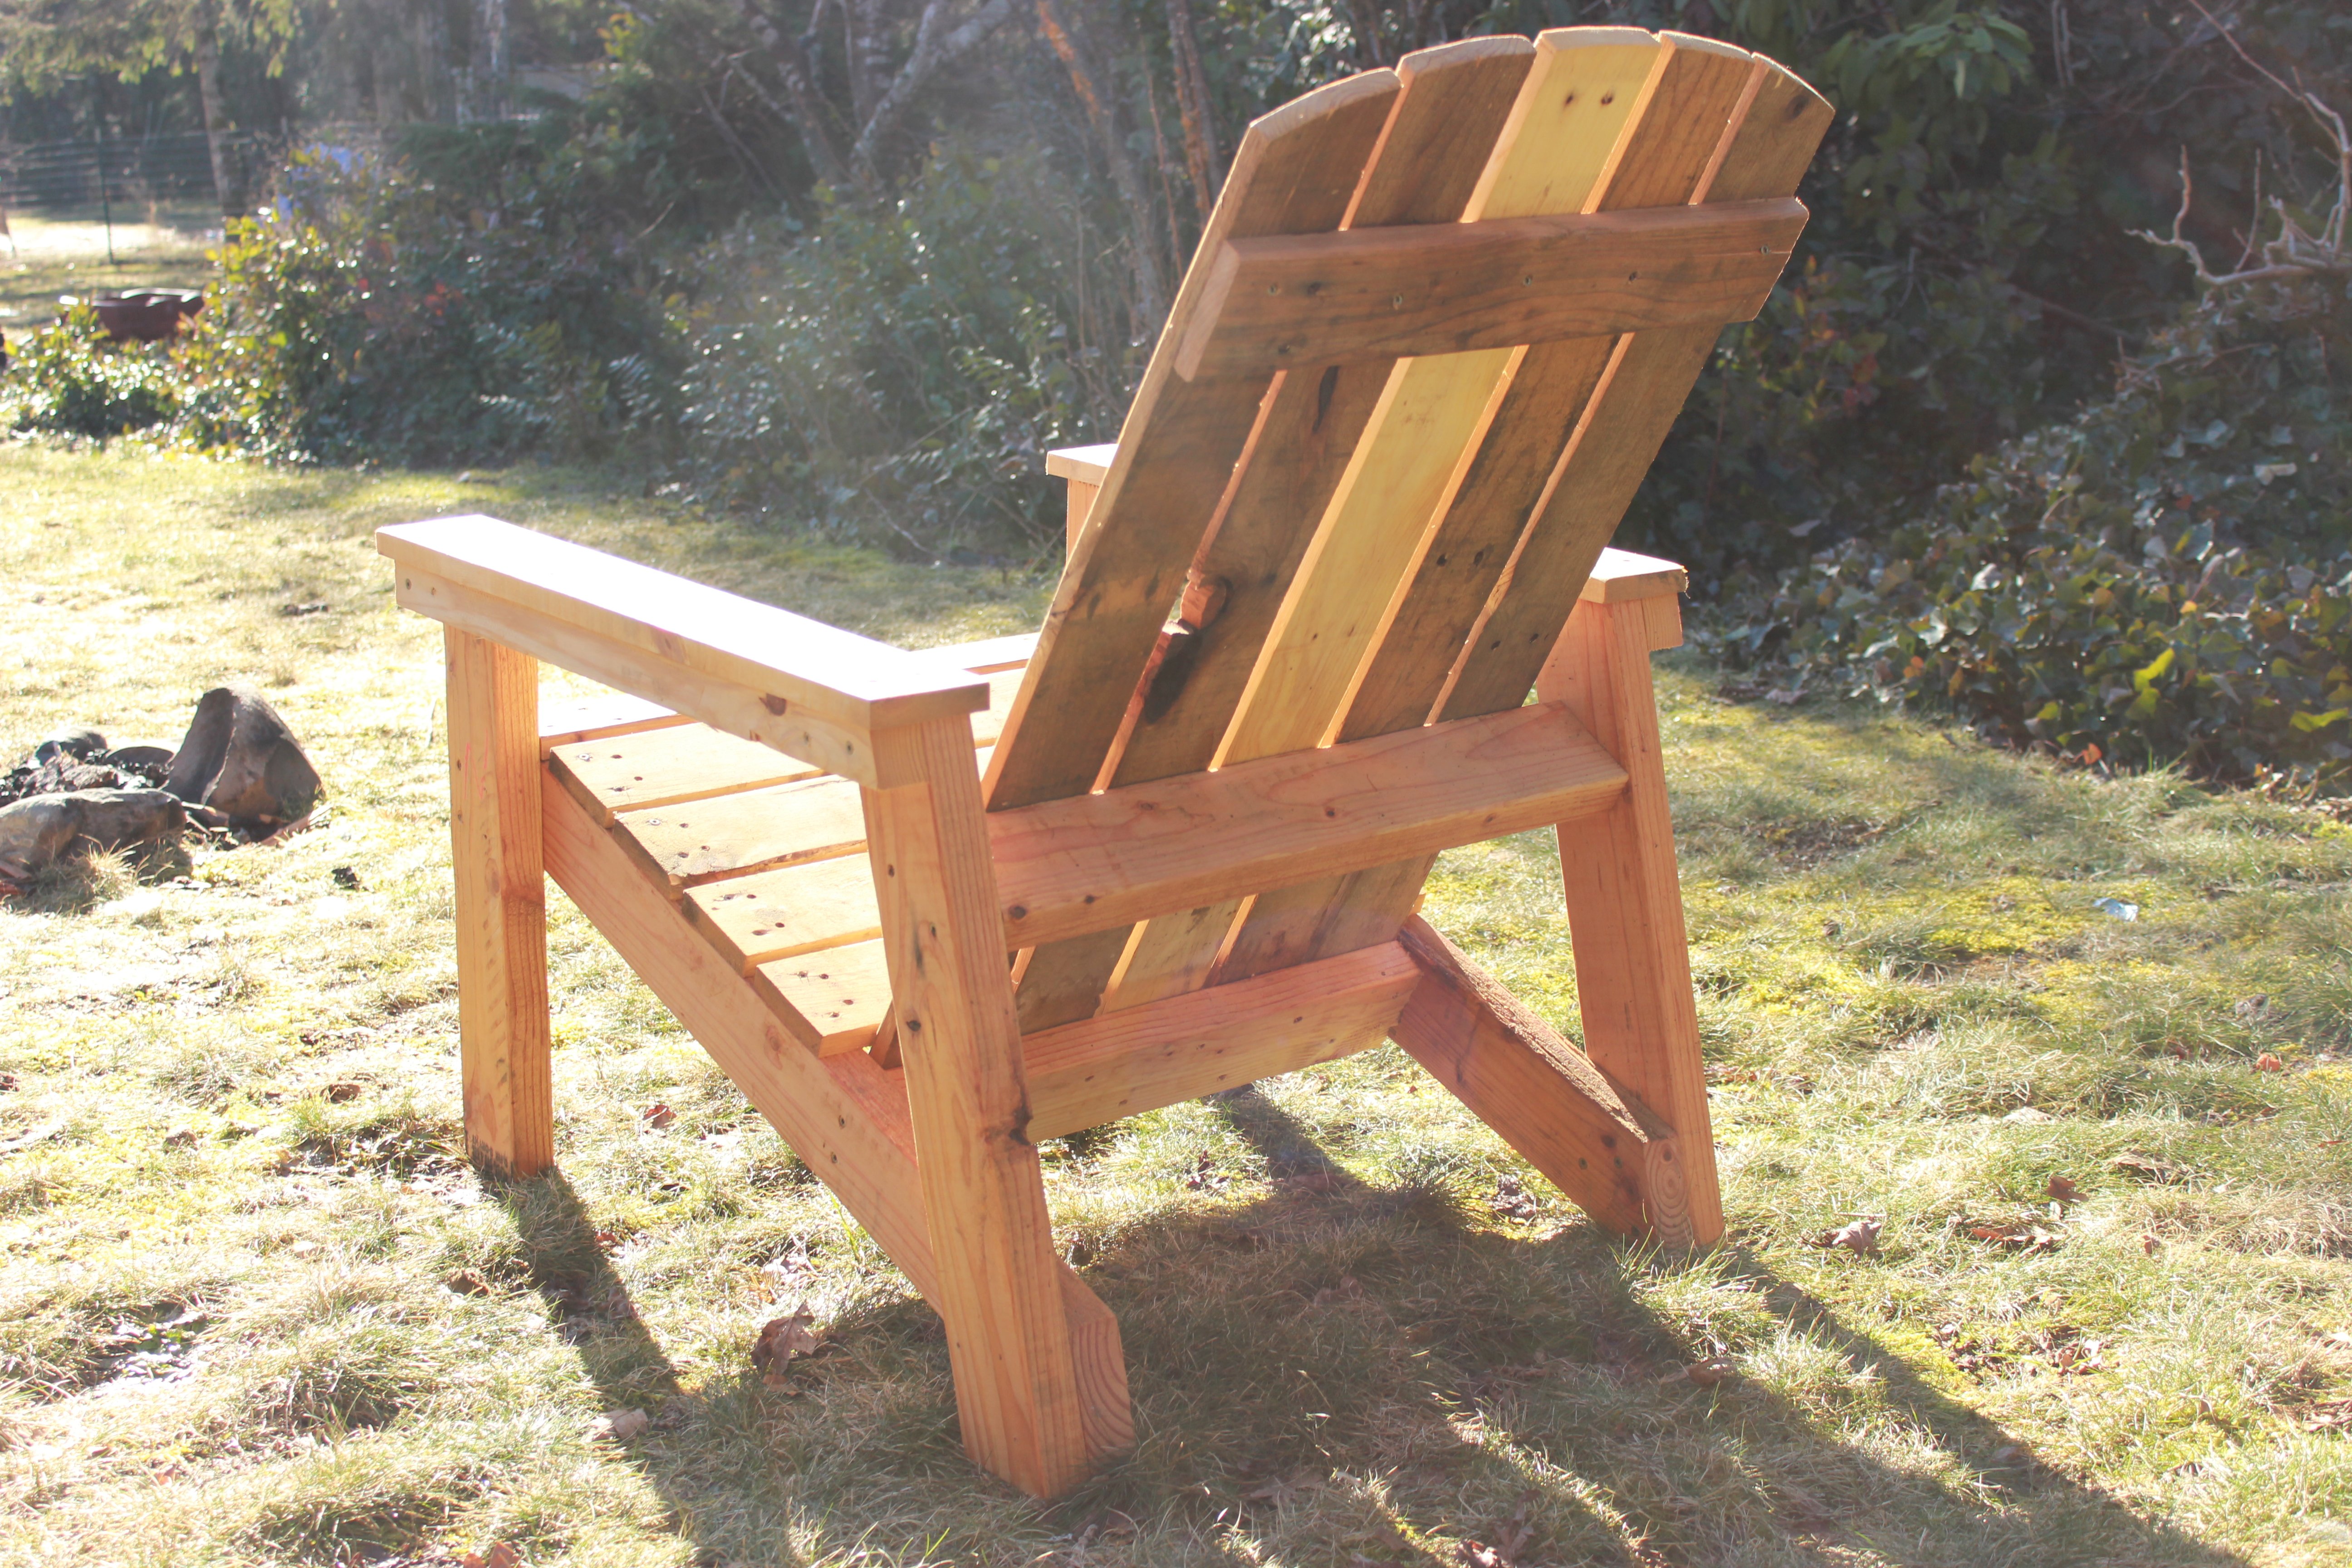 How to build an adirondack chair from a pallet